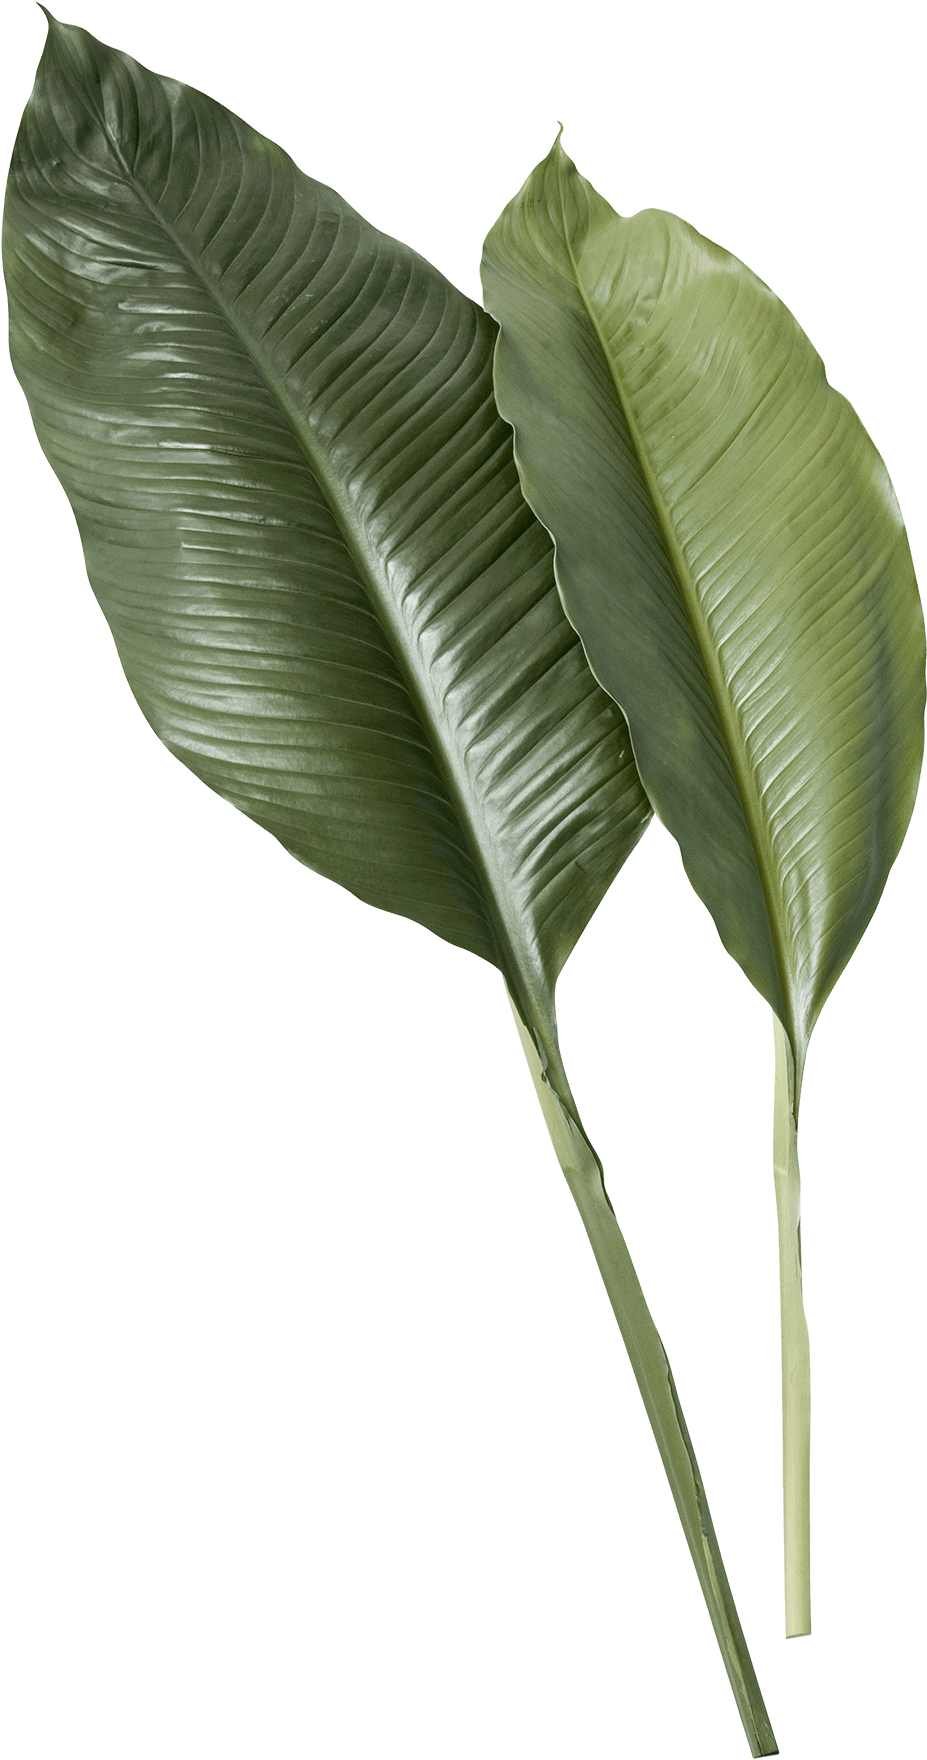 Tropical Green Leaves Texture PNG